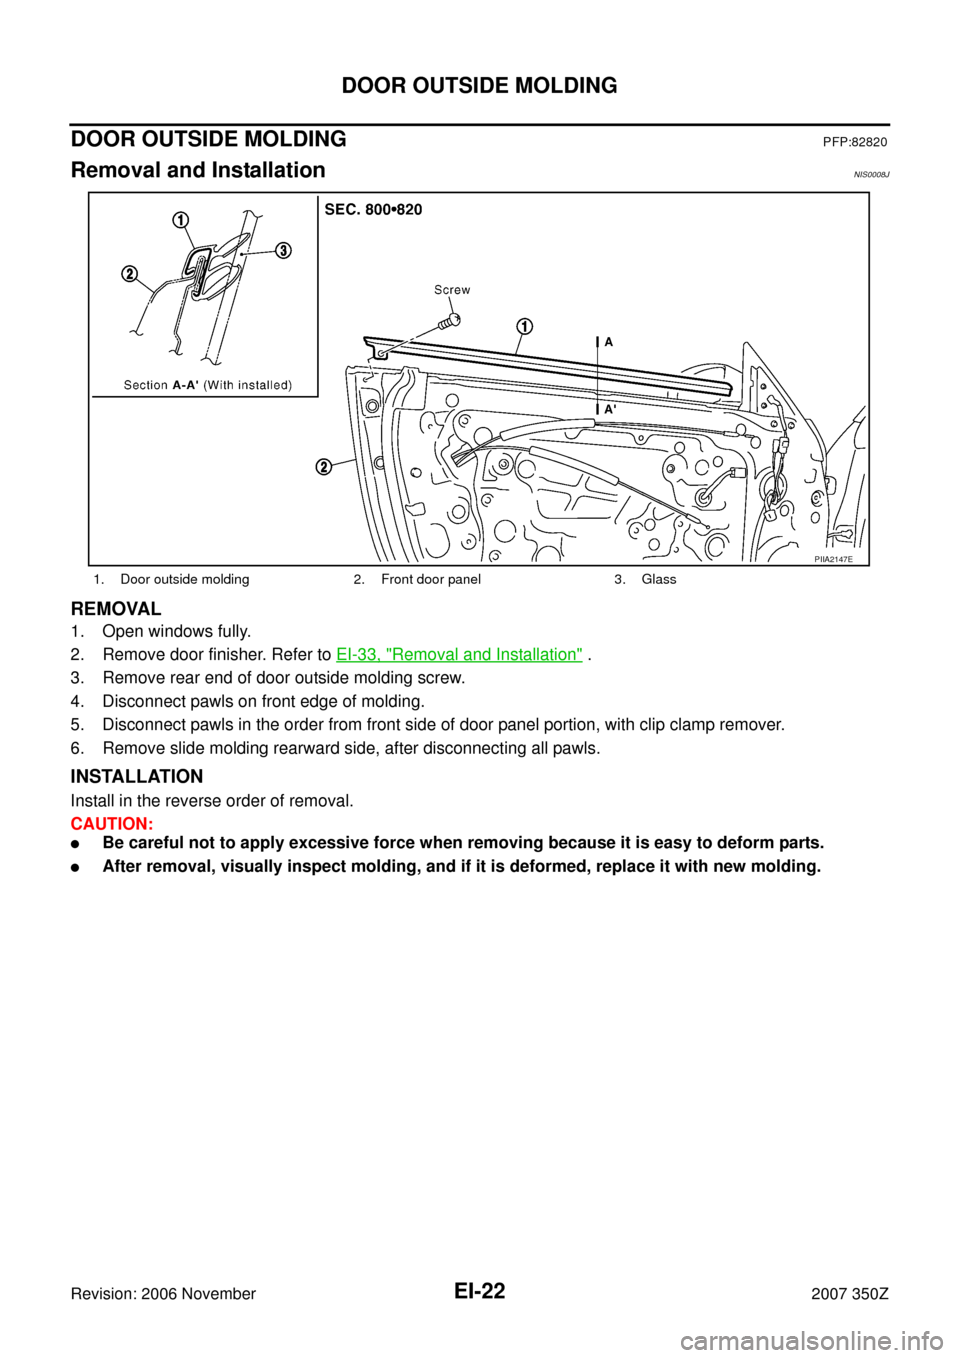 NISSAN 350Z 2007 Z33 Exterior And Interior Owners Manual EI-22
DOOR OUTSIDE MOLDING
Revision: 2006 November2007 350Z
DOOR OUTSIDE MOLDING PFP:82820
Removal and InstallationNIS0008J
REMOVAL
1. Open windows fully.
2. Remove door finisher. Refer to EI-33, "
Re